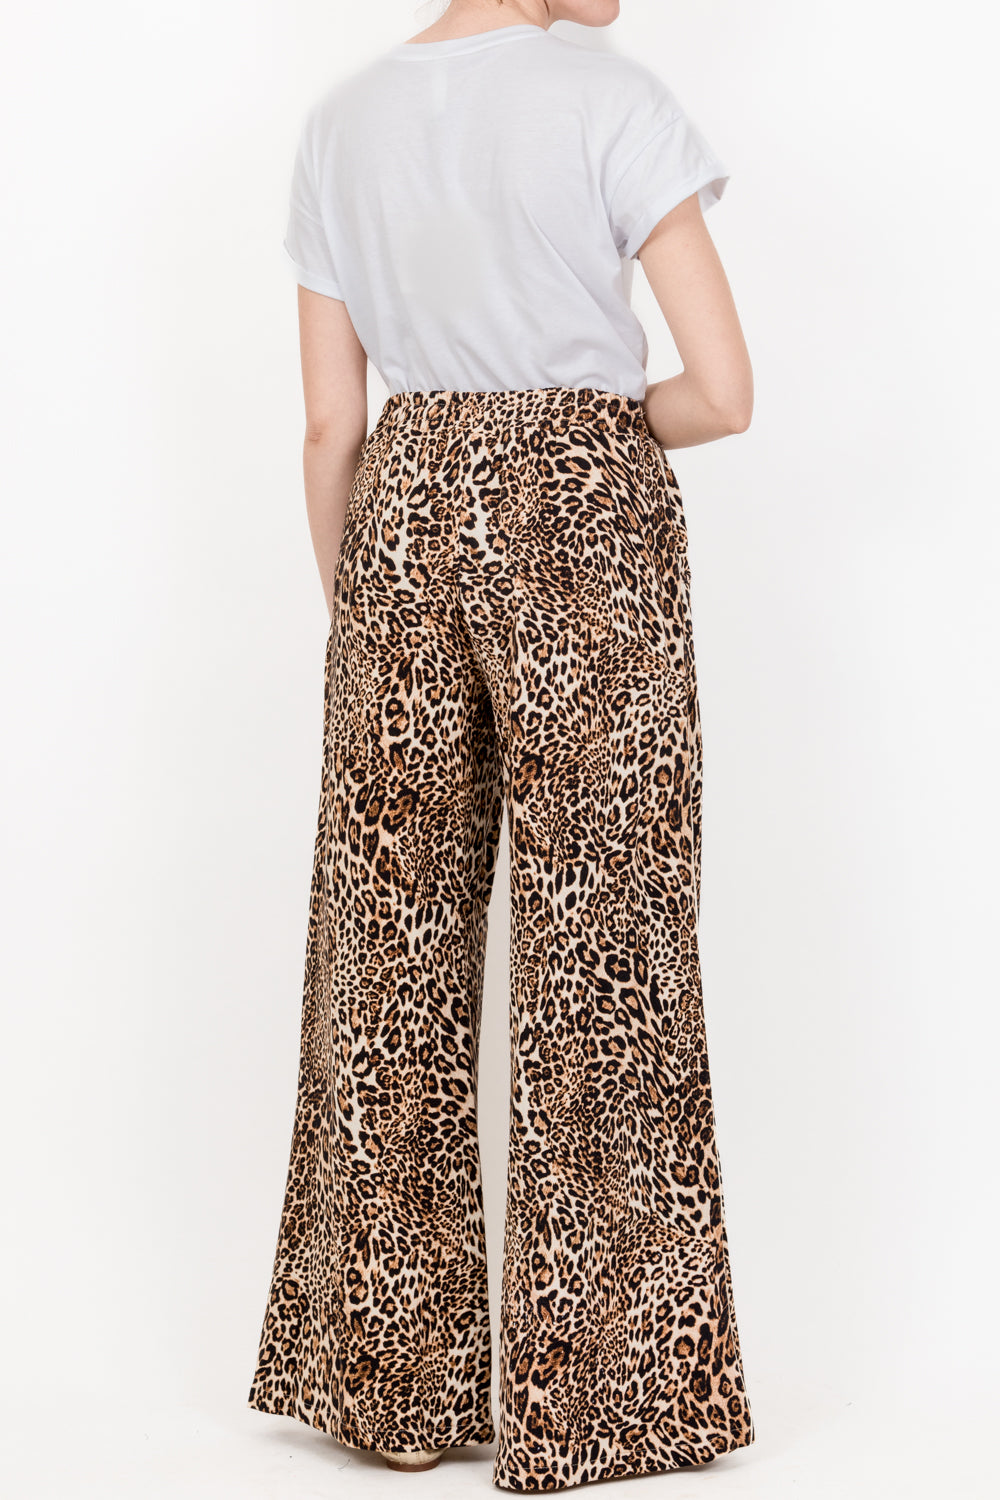 Tensione In - Pantalone animalier con coulisse Art. NS917